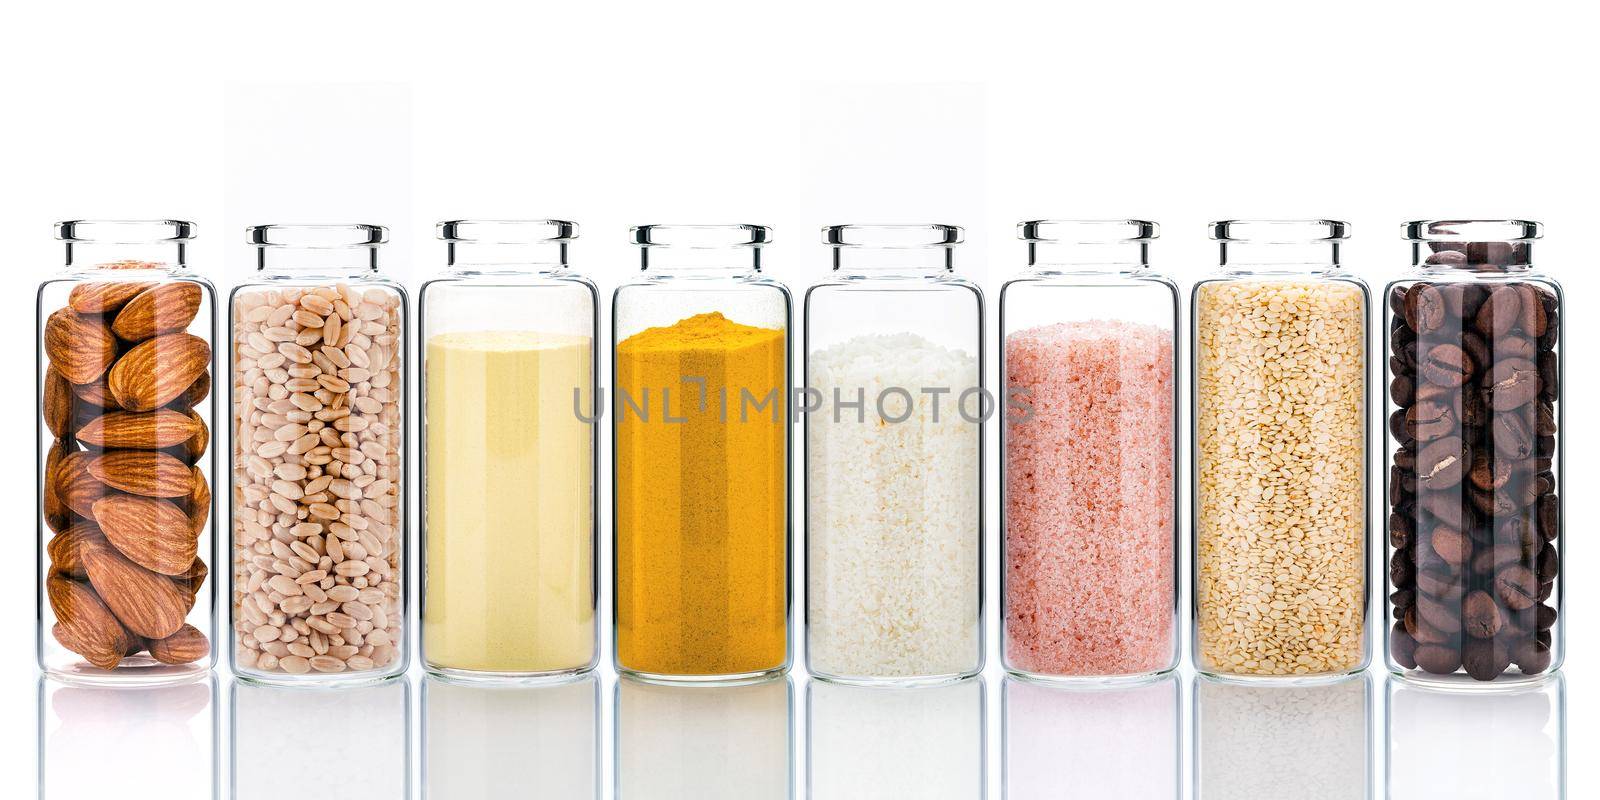 Homemade skin care with natural ingredients and herbs in glass bottles isolate on white background.